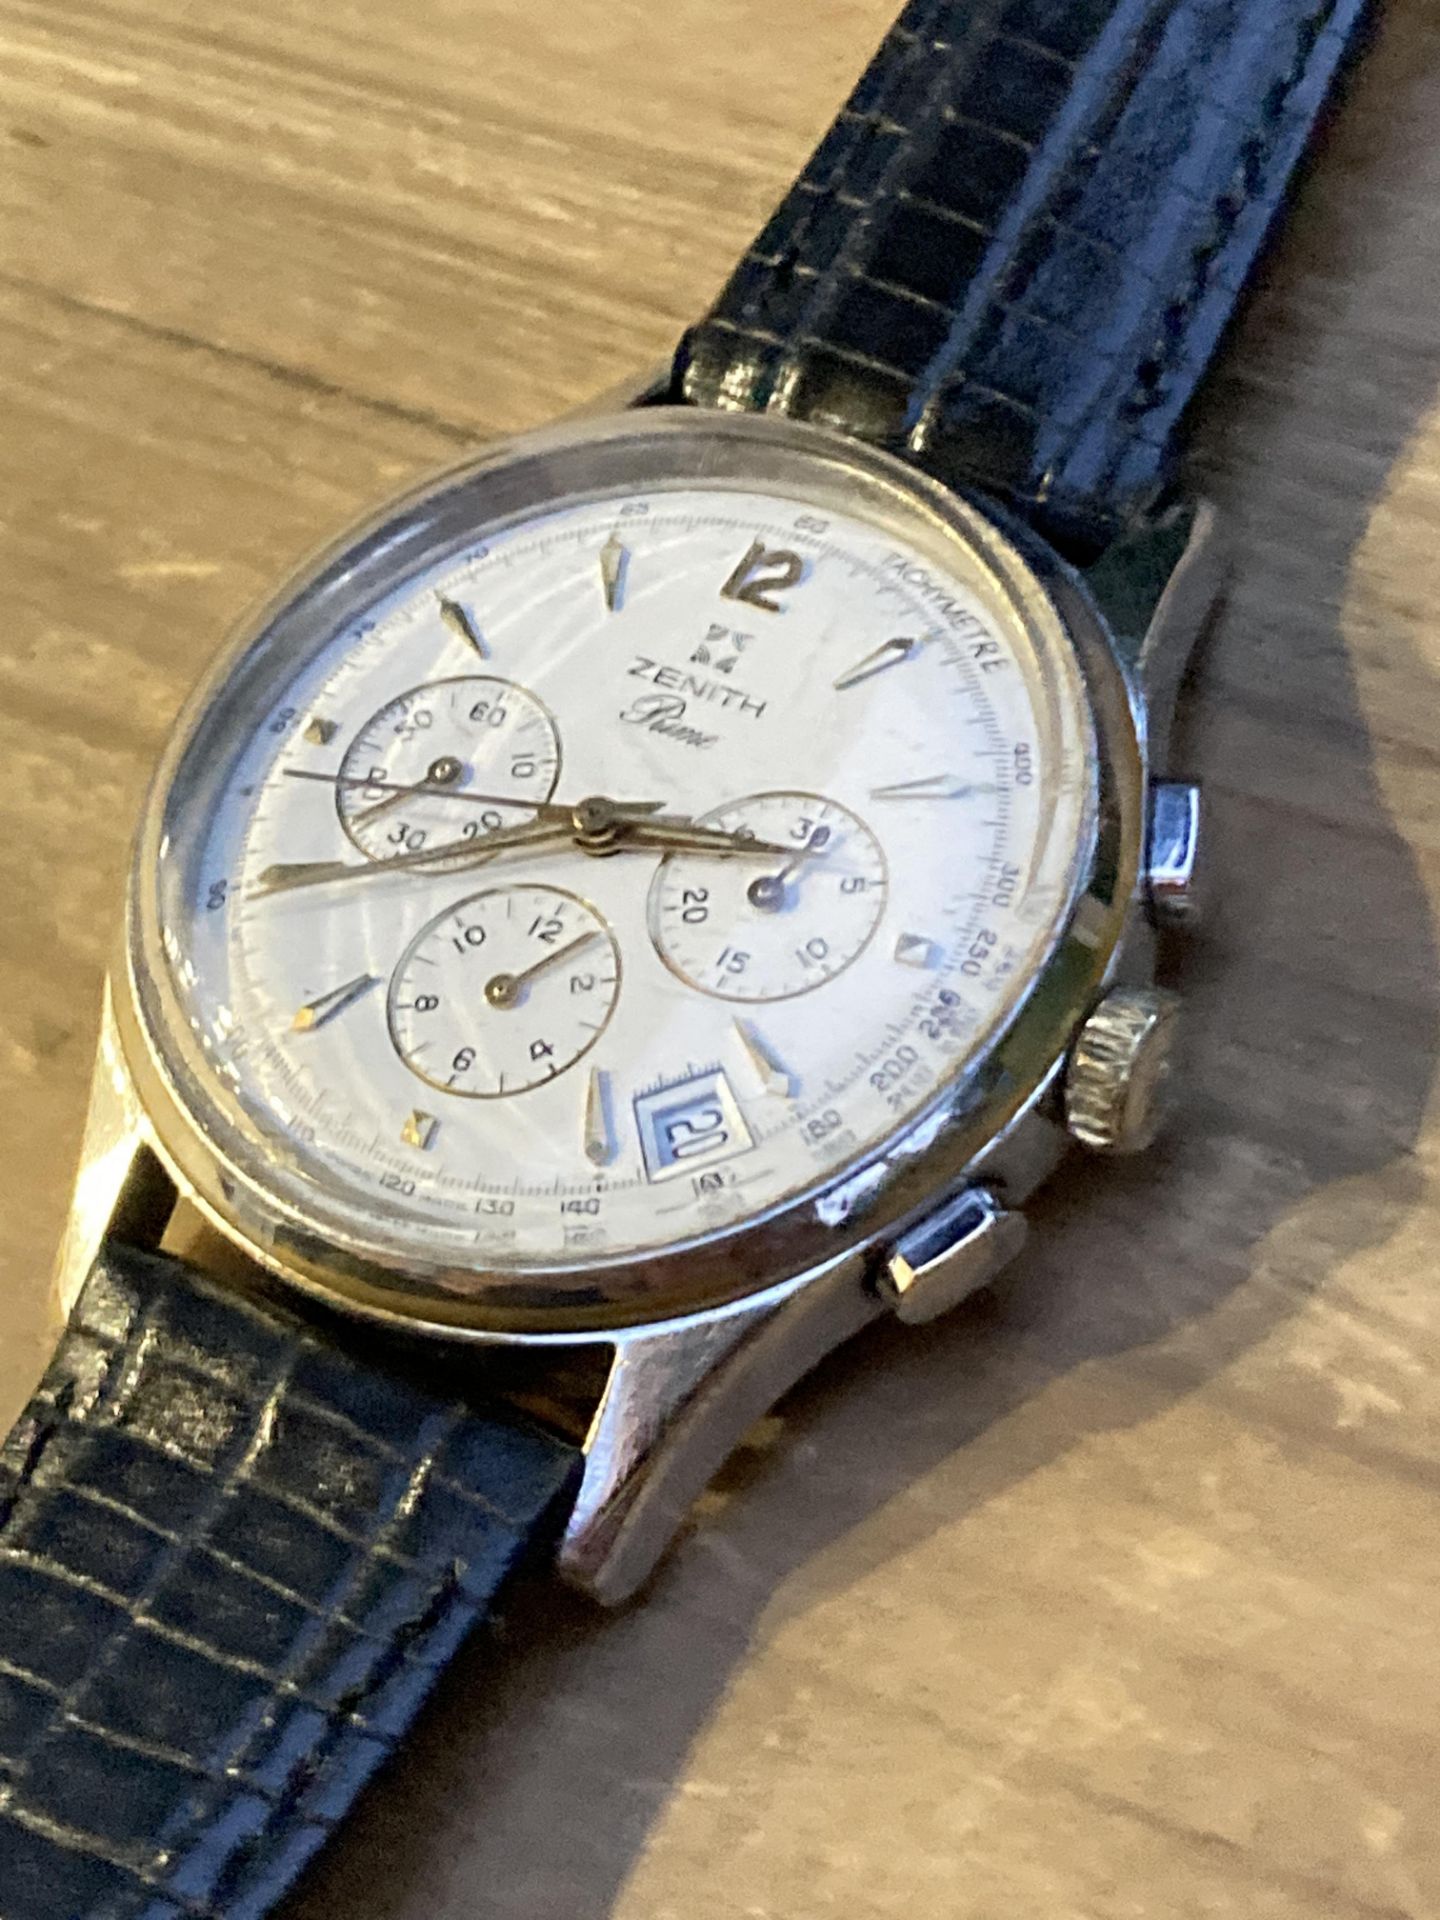 ZENITH PRIME EL PRIMERO CHRONOGRAPH WATCH, WHITE DIAL, APPROX 40MM INC CROWN - Image 5 of 9